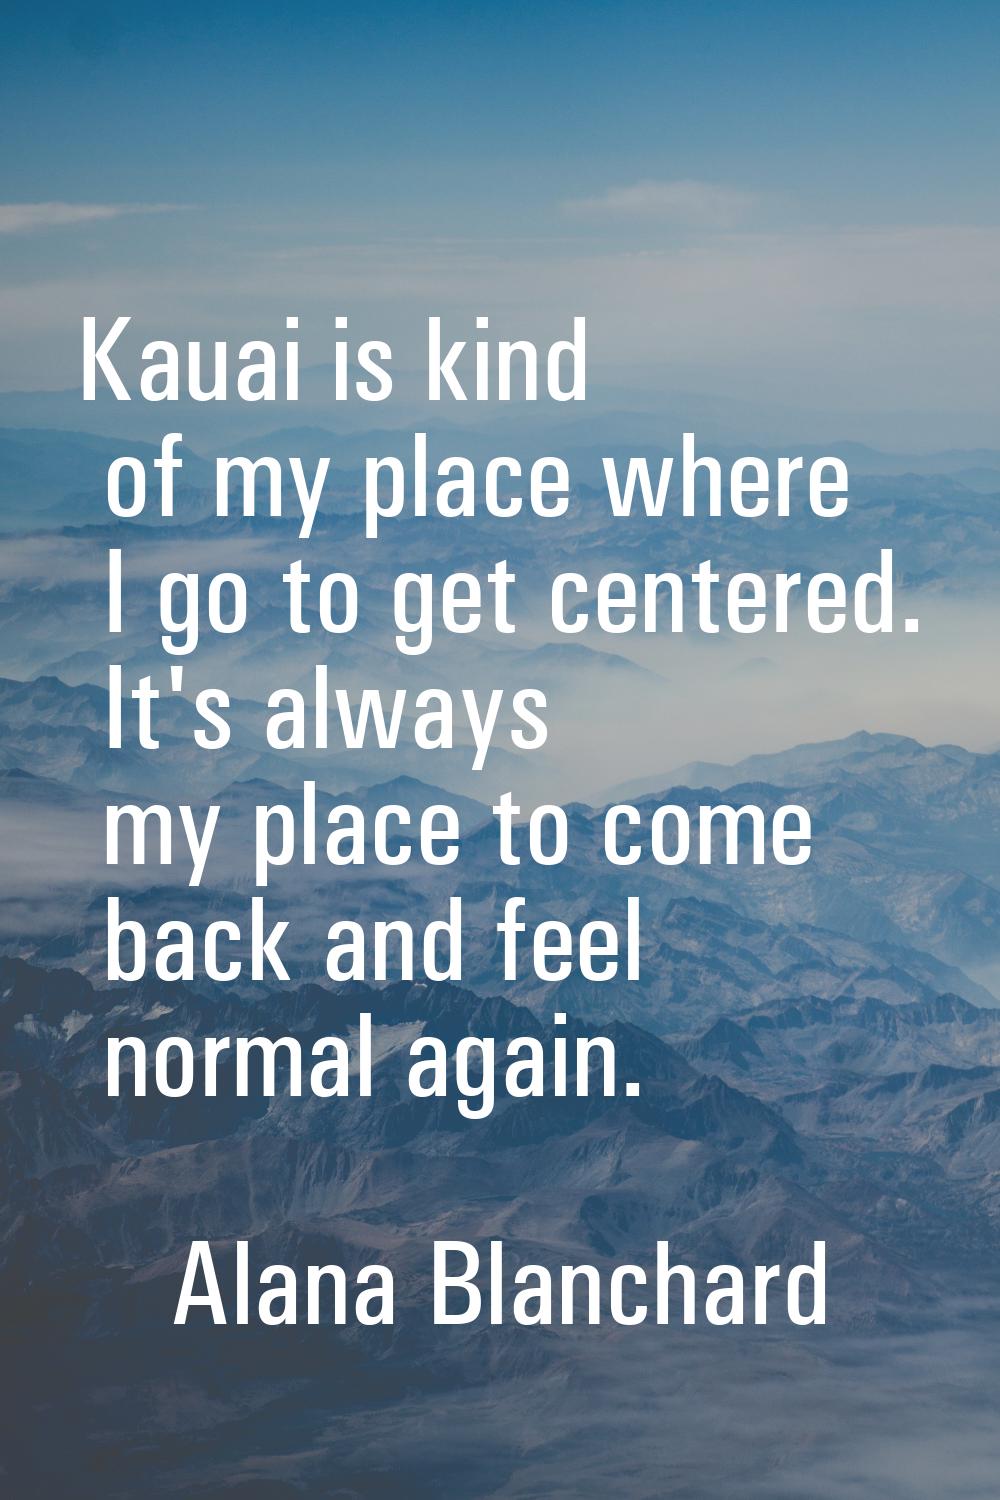 Kauai is kind of my place where I go to get centered. It's always my place to come back and feel no